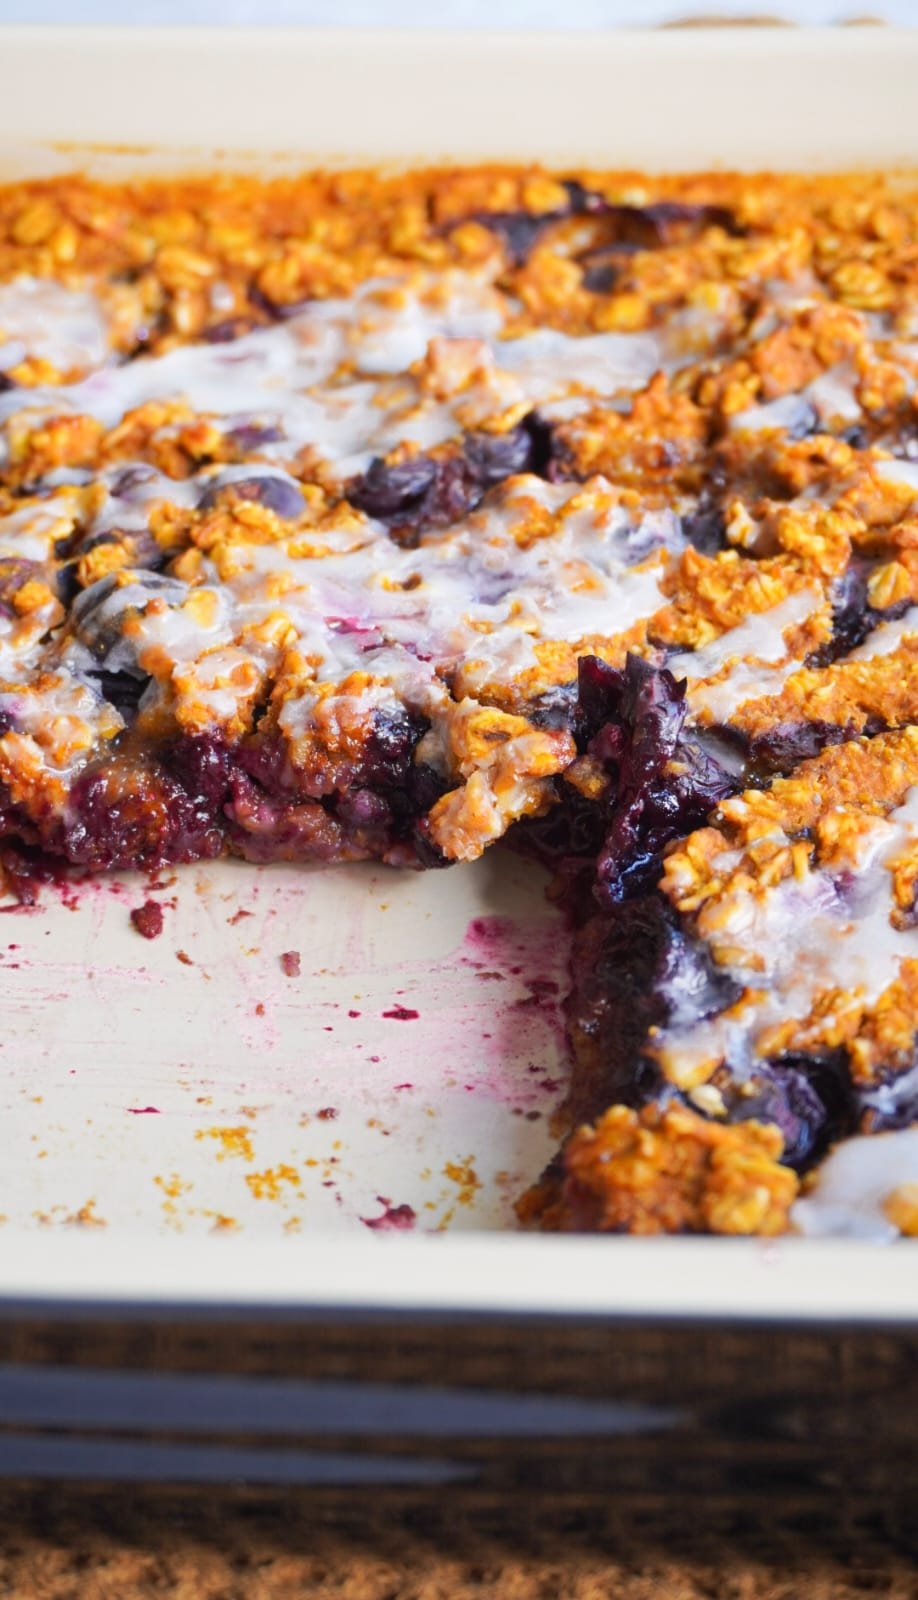 A tasty slice of blueberry pumpkin baked oatmeal that fills you up for the most part of your day.